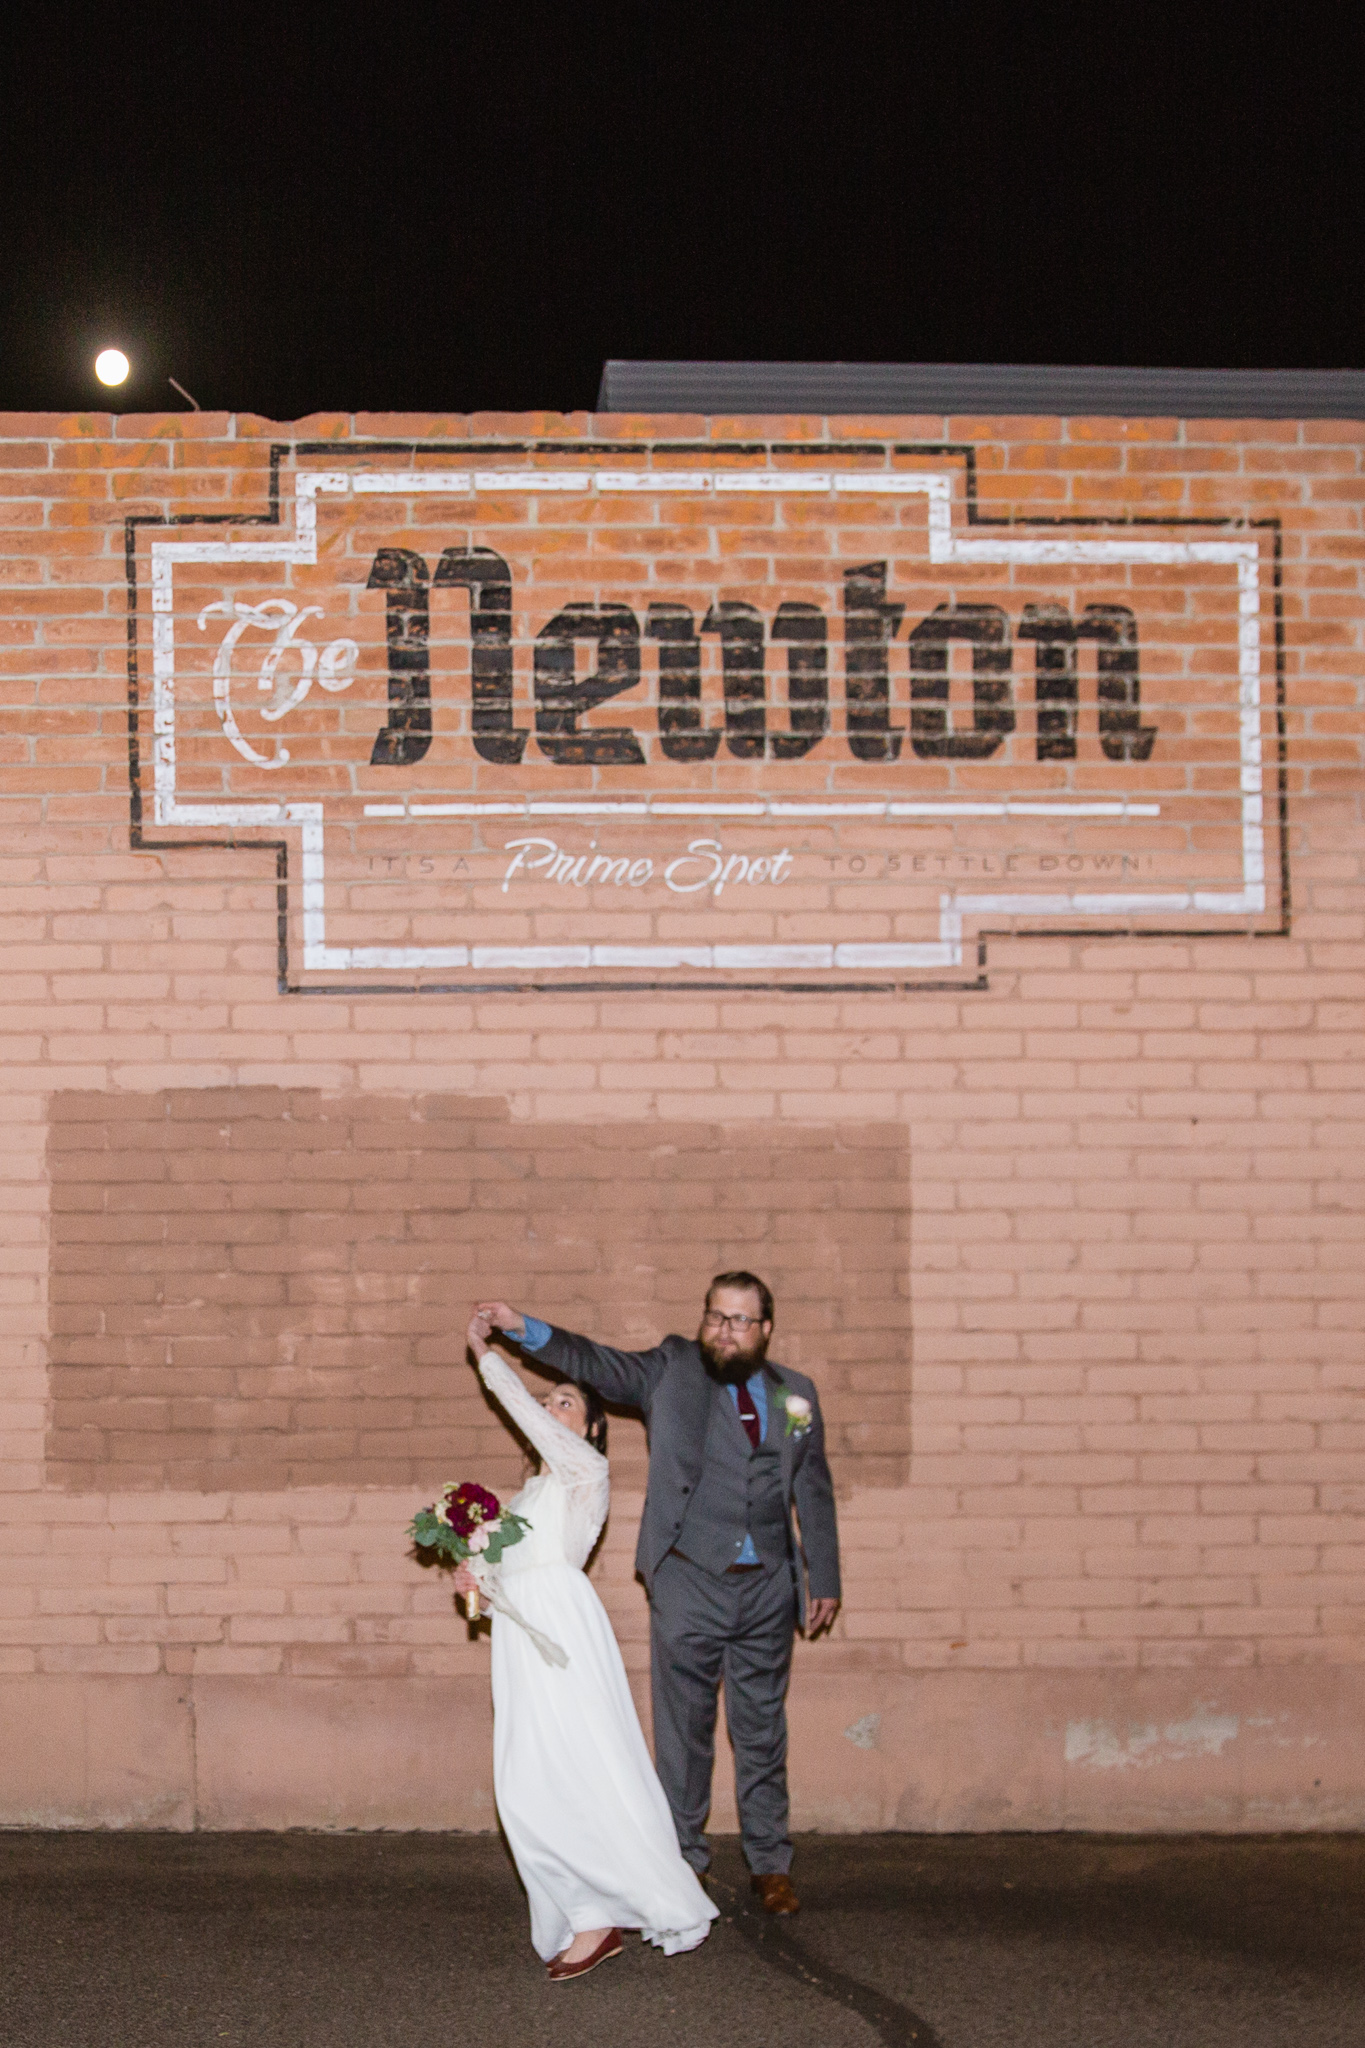 Bride and groom in from of The Newton sign on a brick wall outside of the venue where they were married.